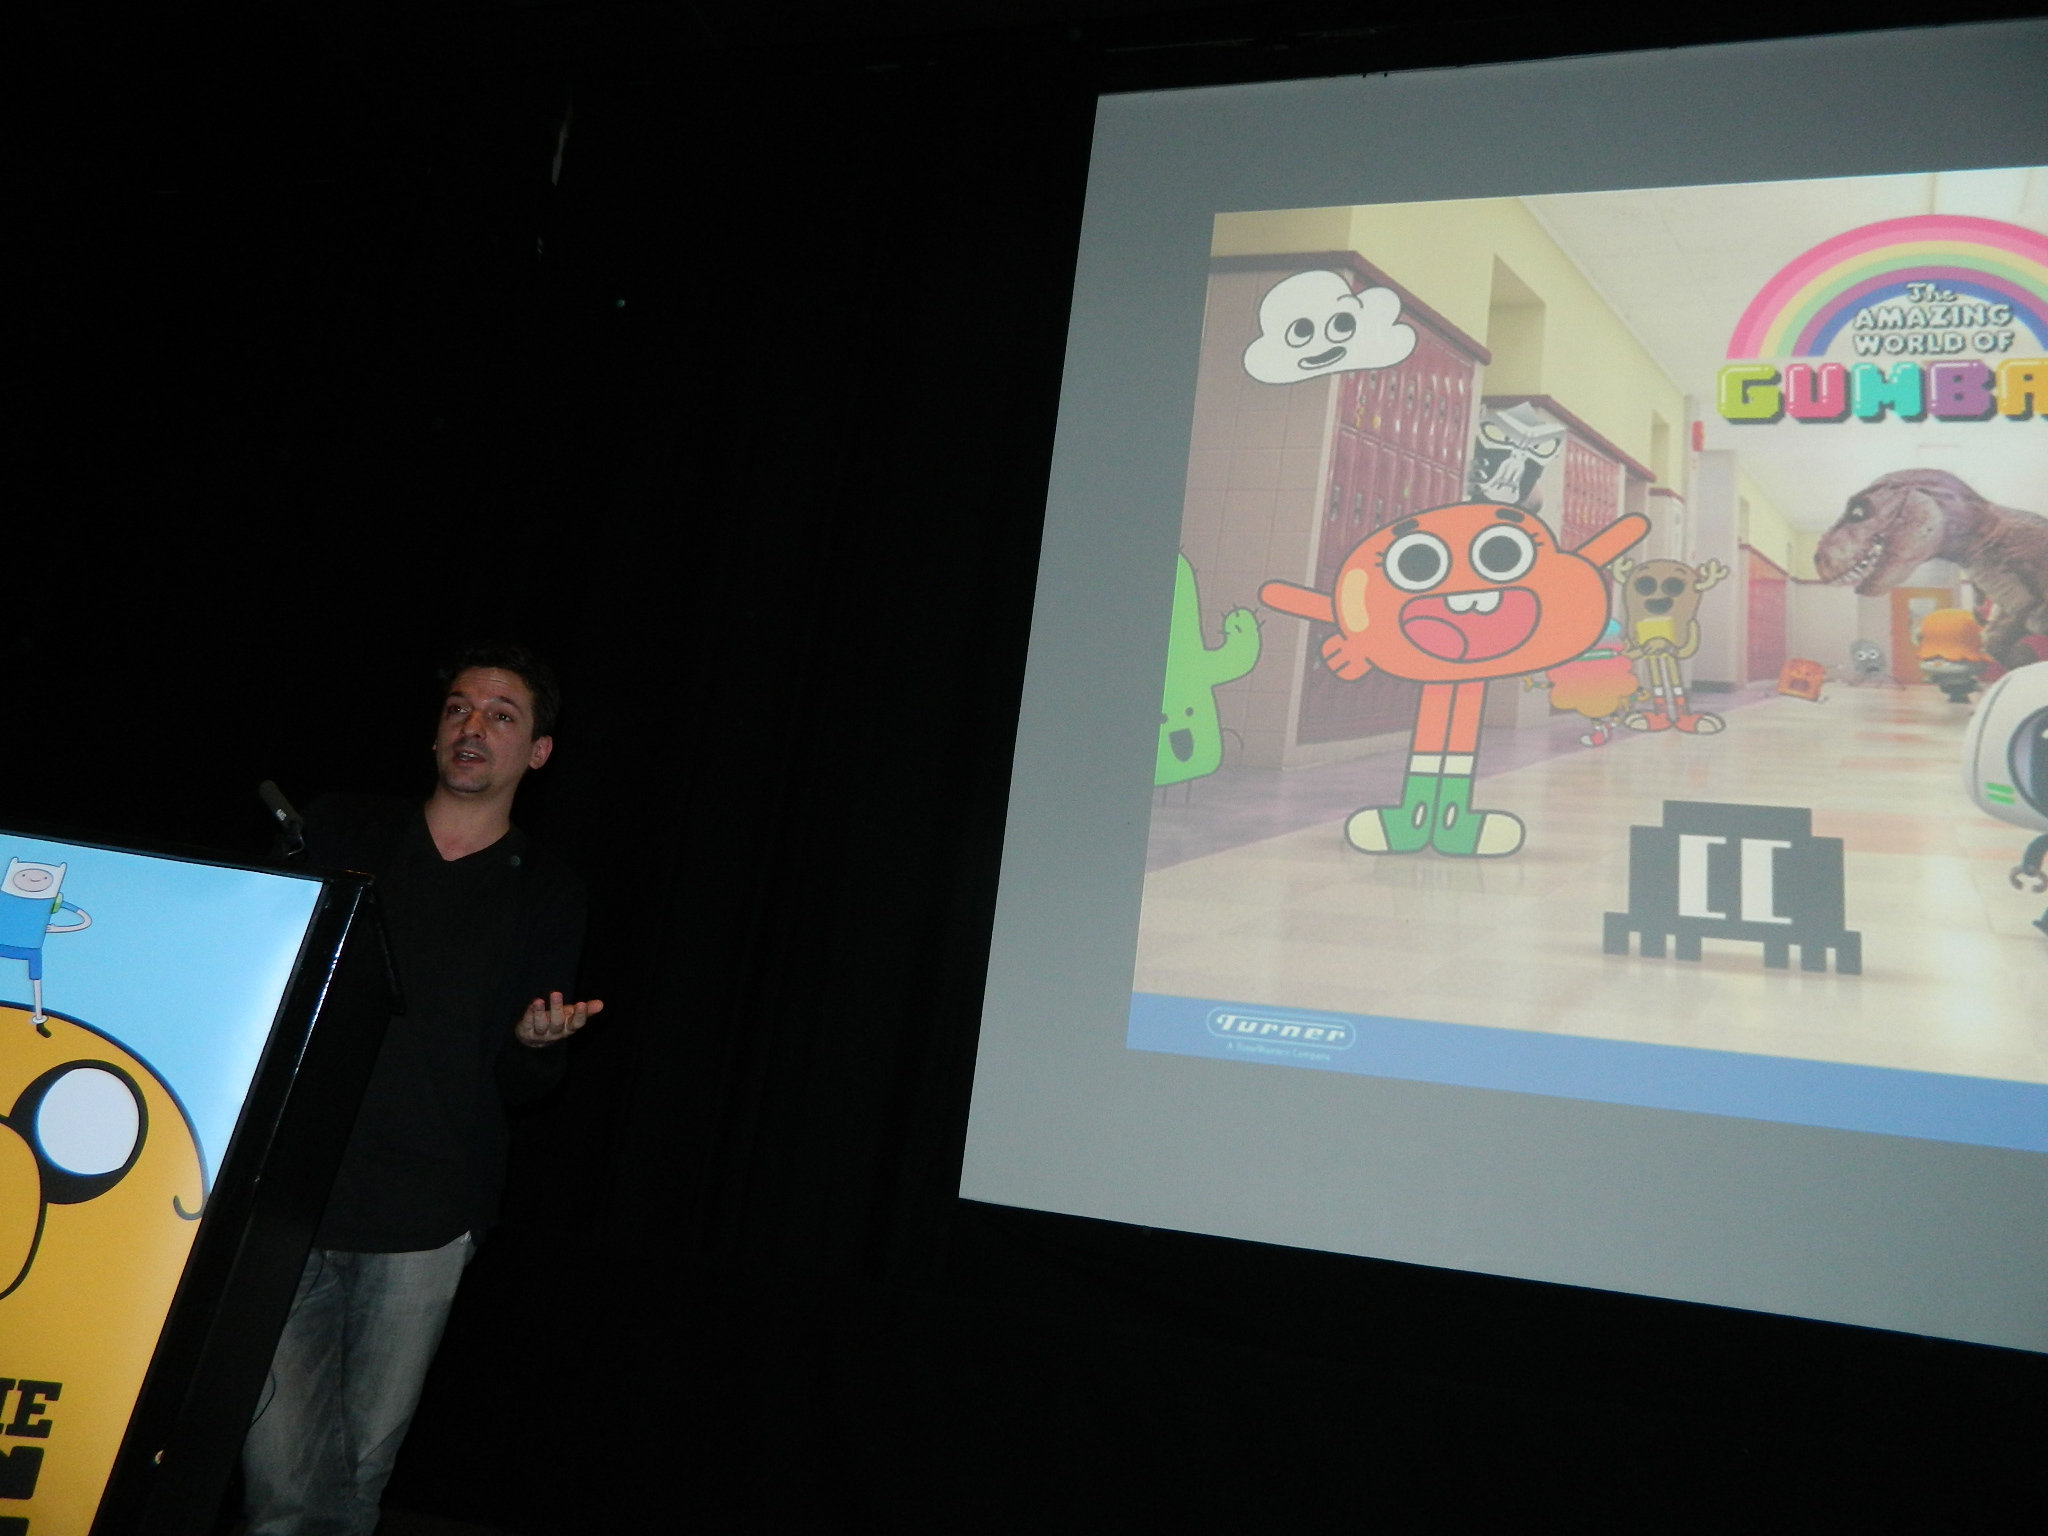 Interview with Ben Bocquelet, creator of 'The Amazing World of Gumball' -  Skwigly Animation Magazine